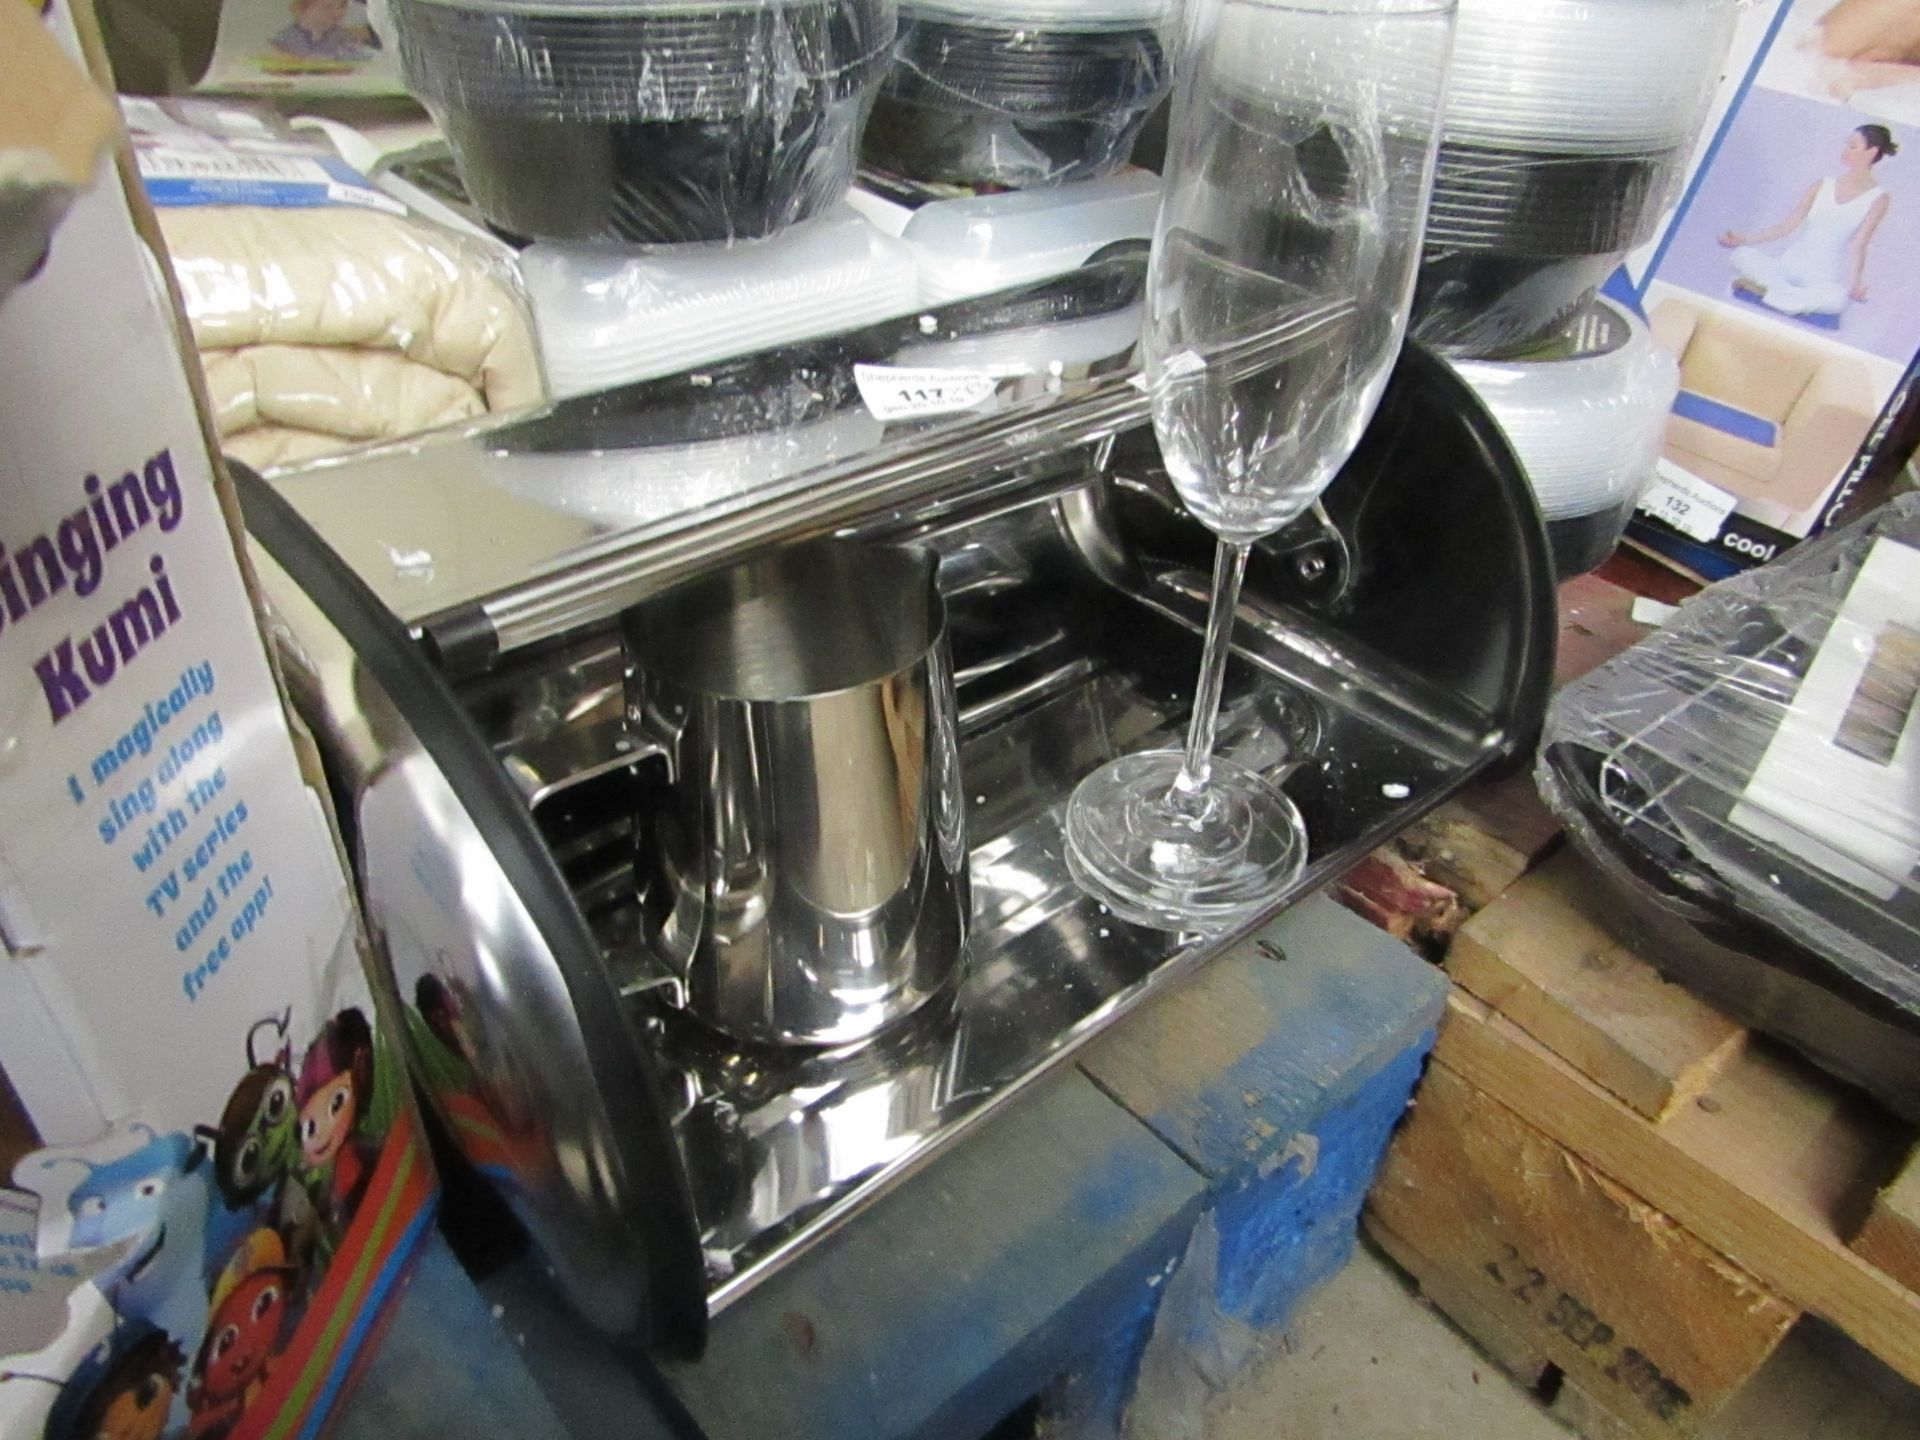 3 Items being a Stainless steel bread bin,a milf jug & a champagne flute.All unused